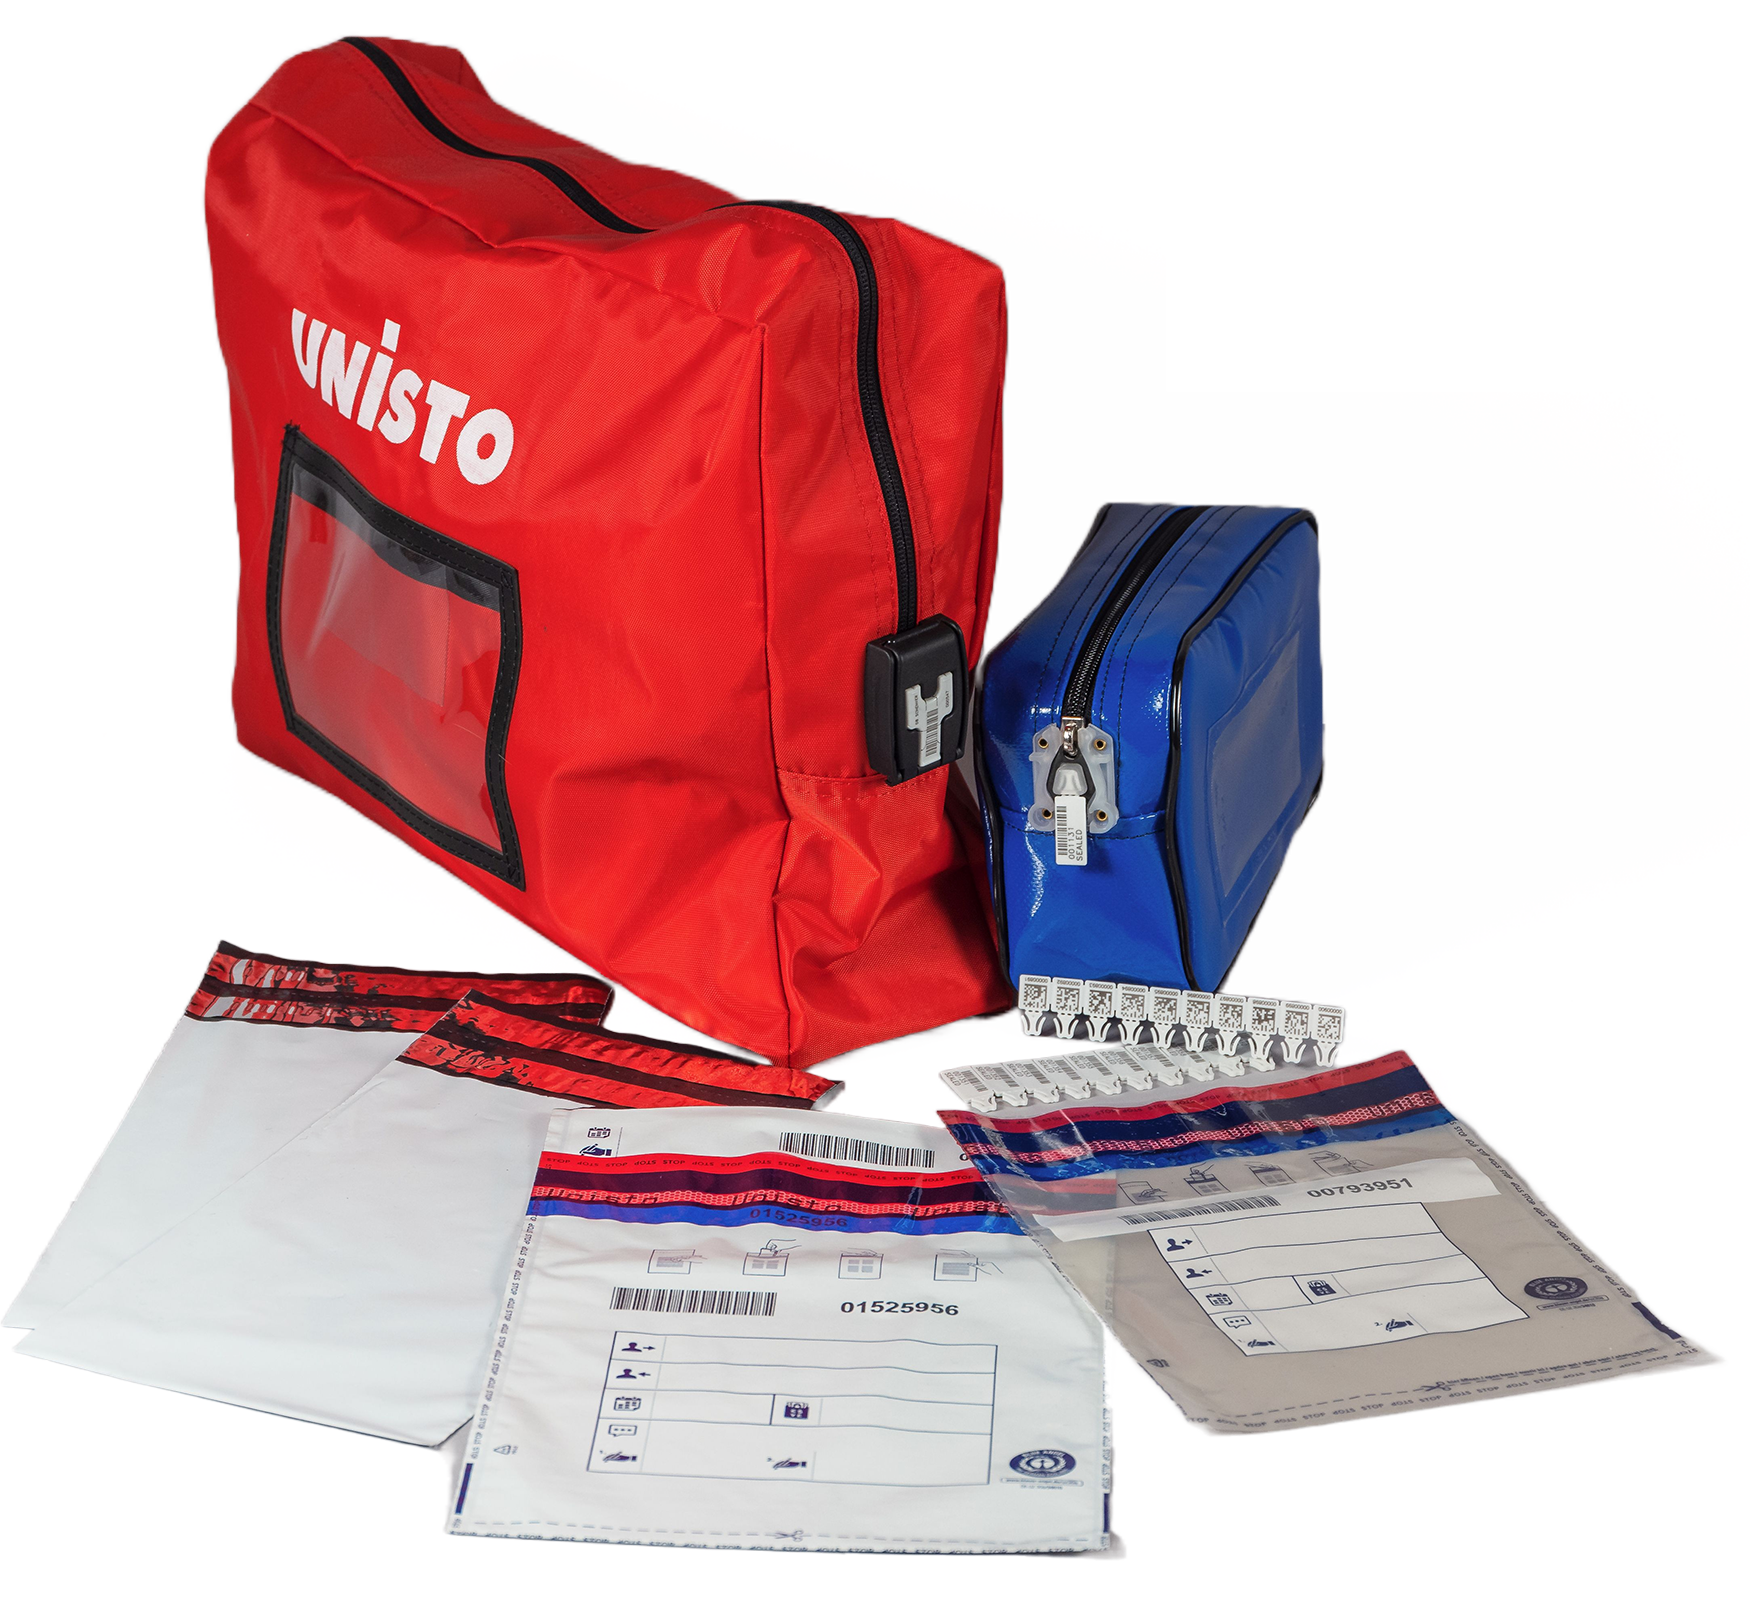 Unisto Sustainable security bags - Safebags